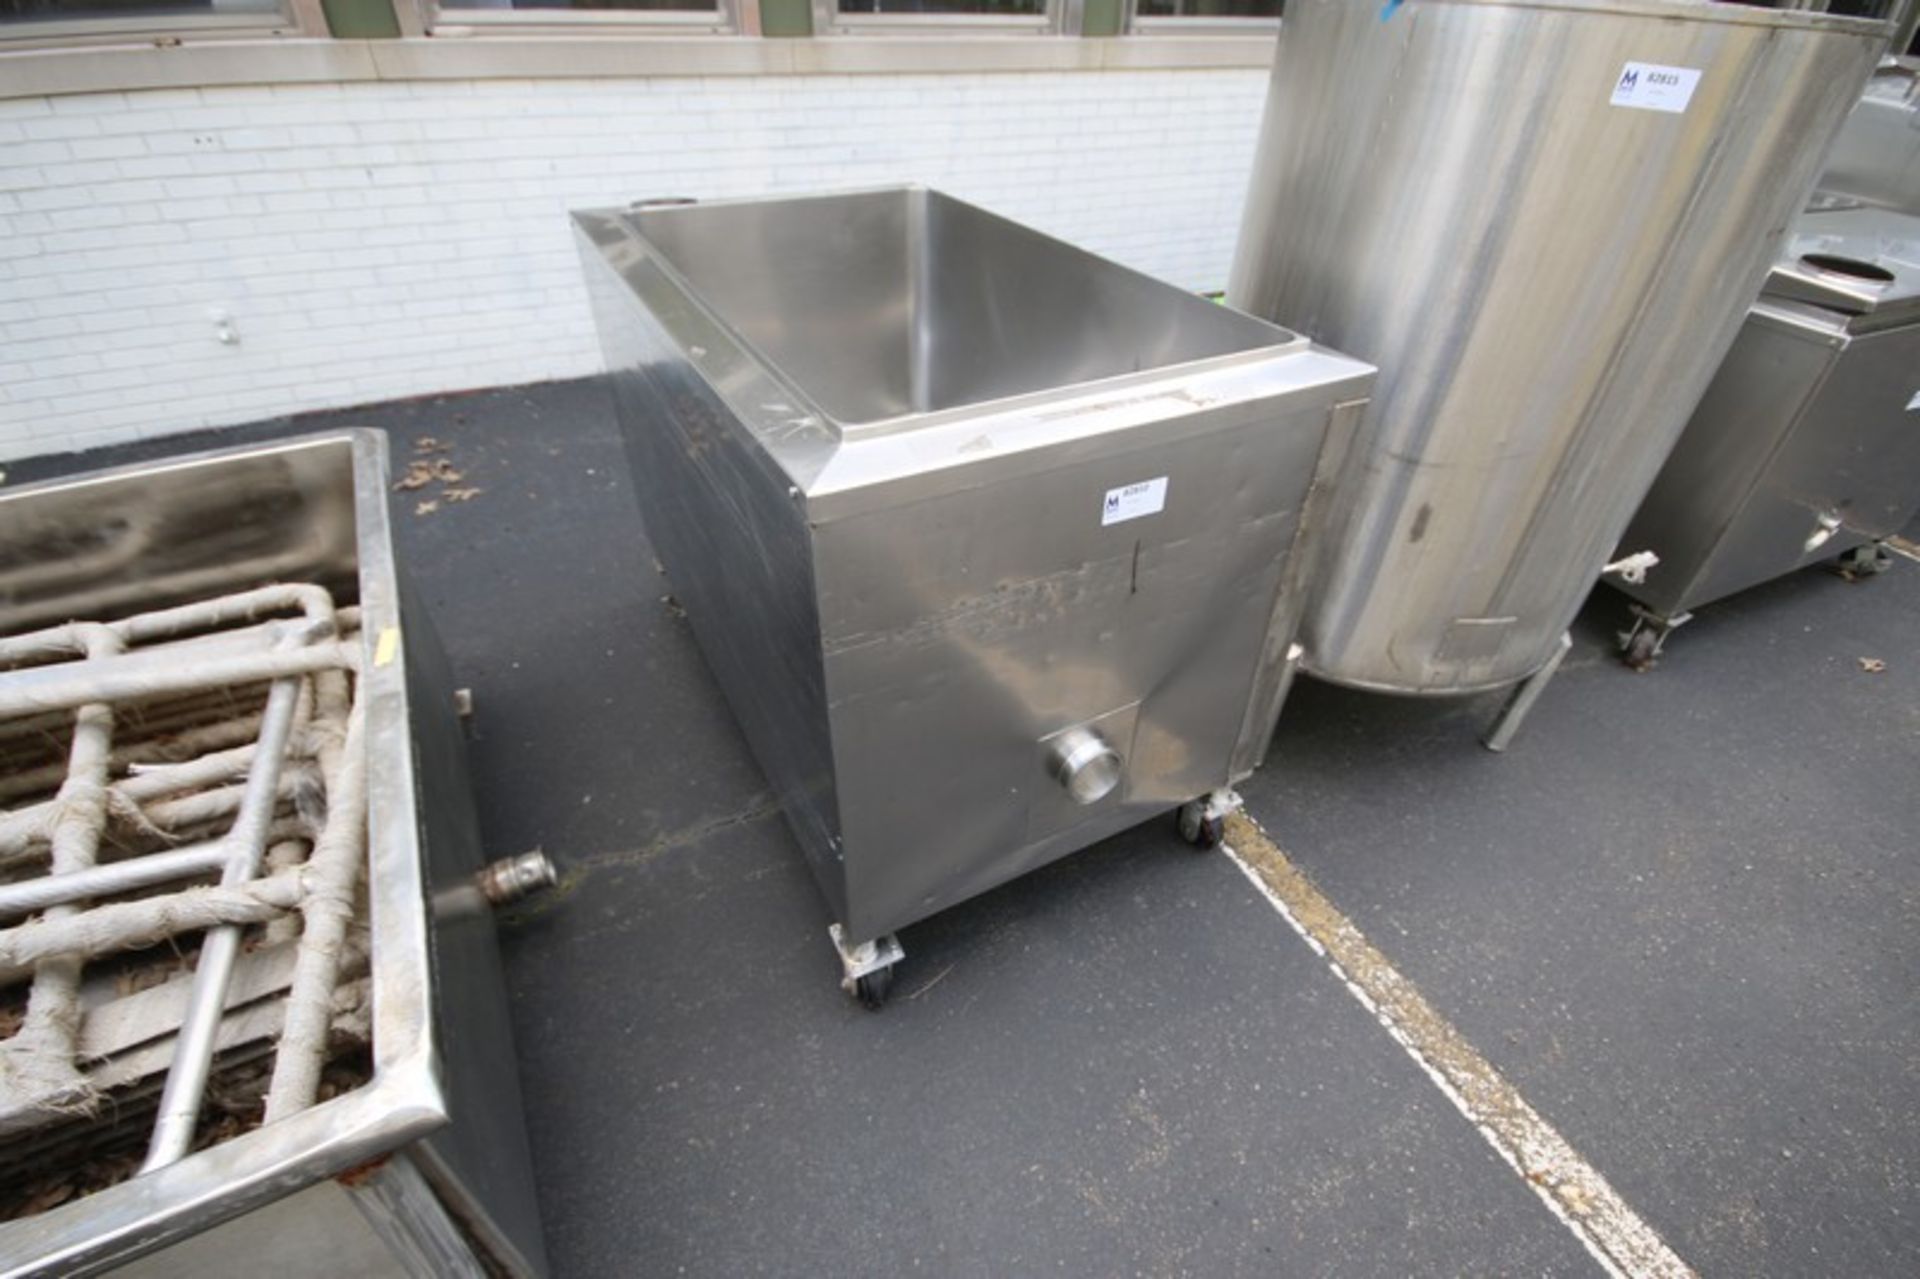 Square S/S Tank, Internal Dims. Aprox. 3 ft. 9” L x 24” W x 25” Deep, Mounted on Portable Wheels (